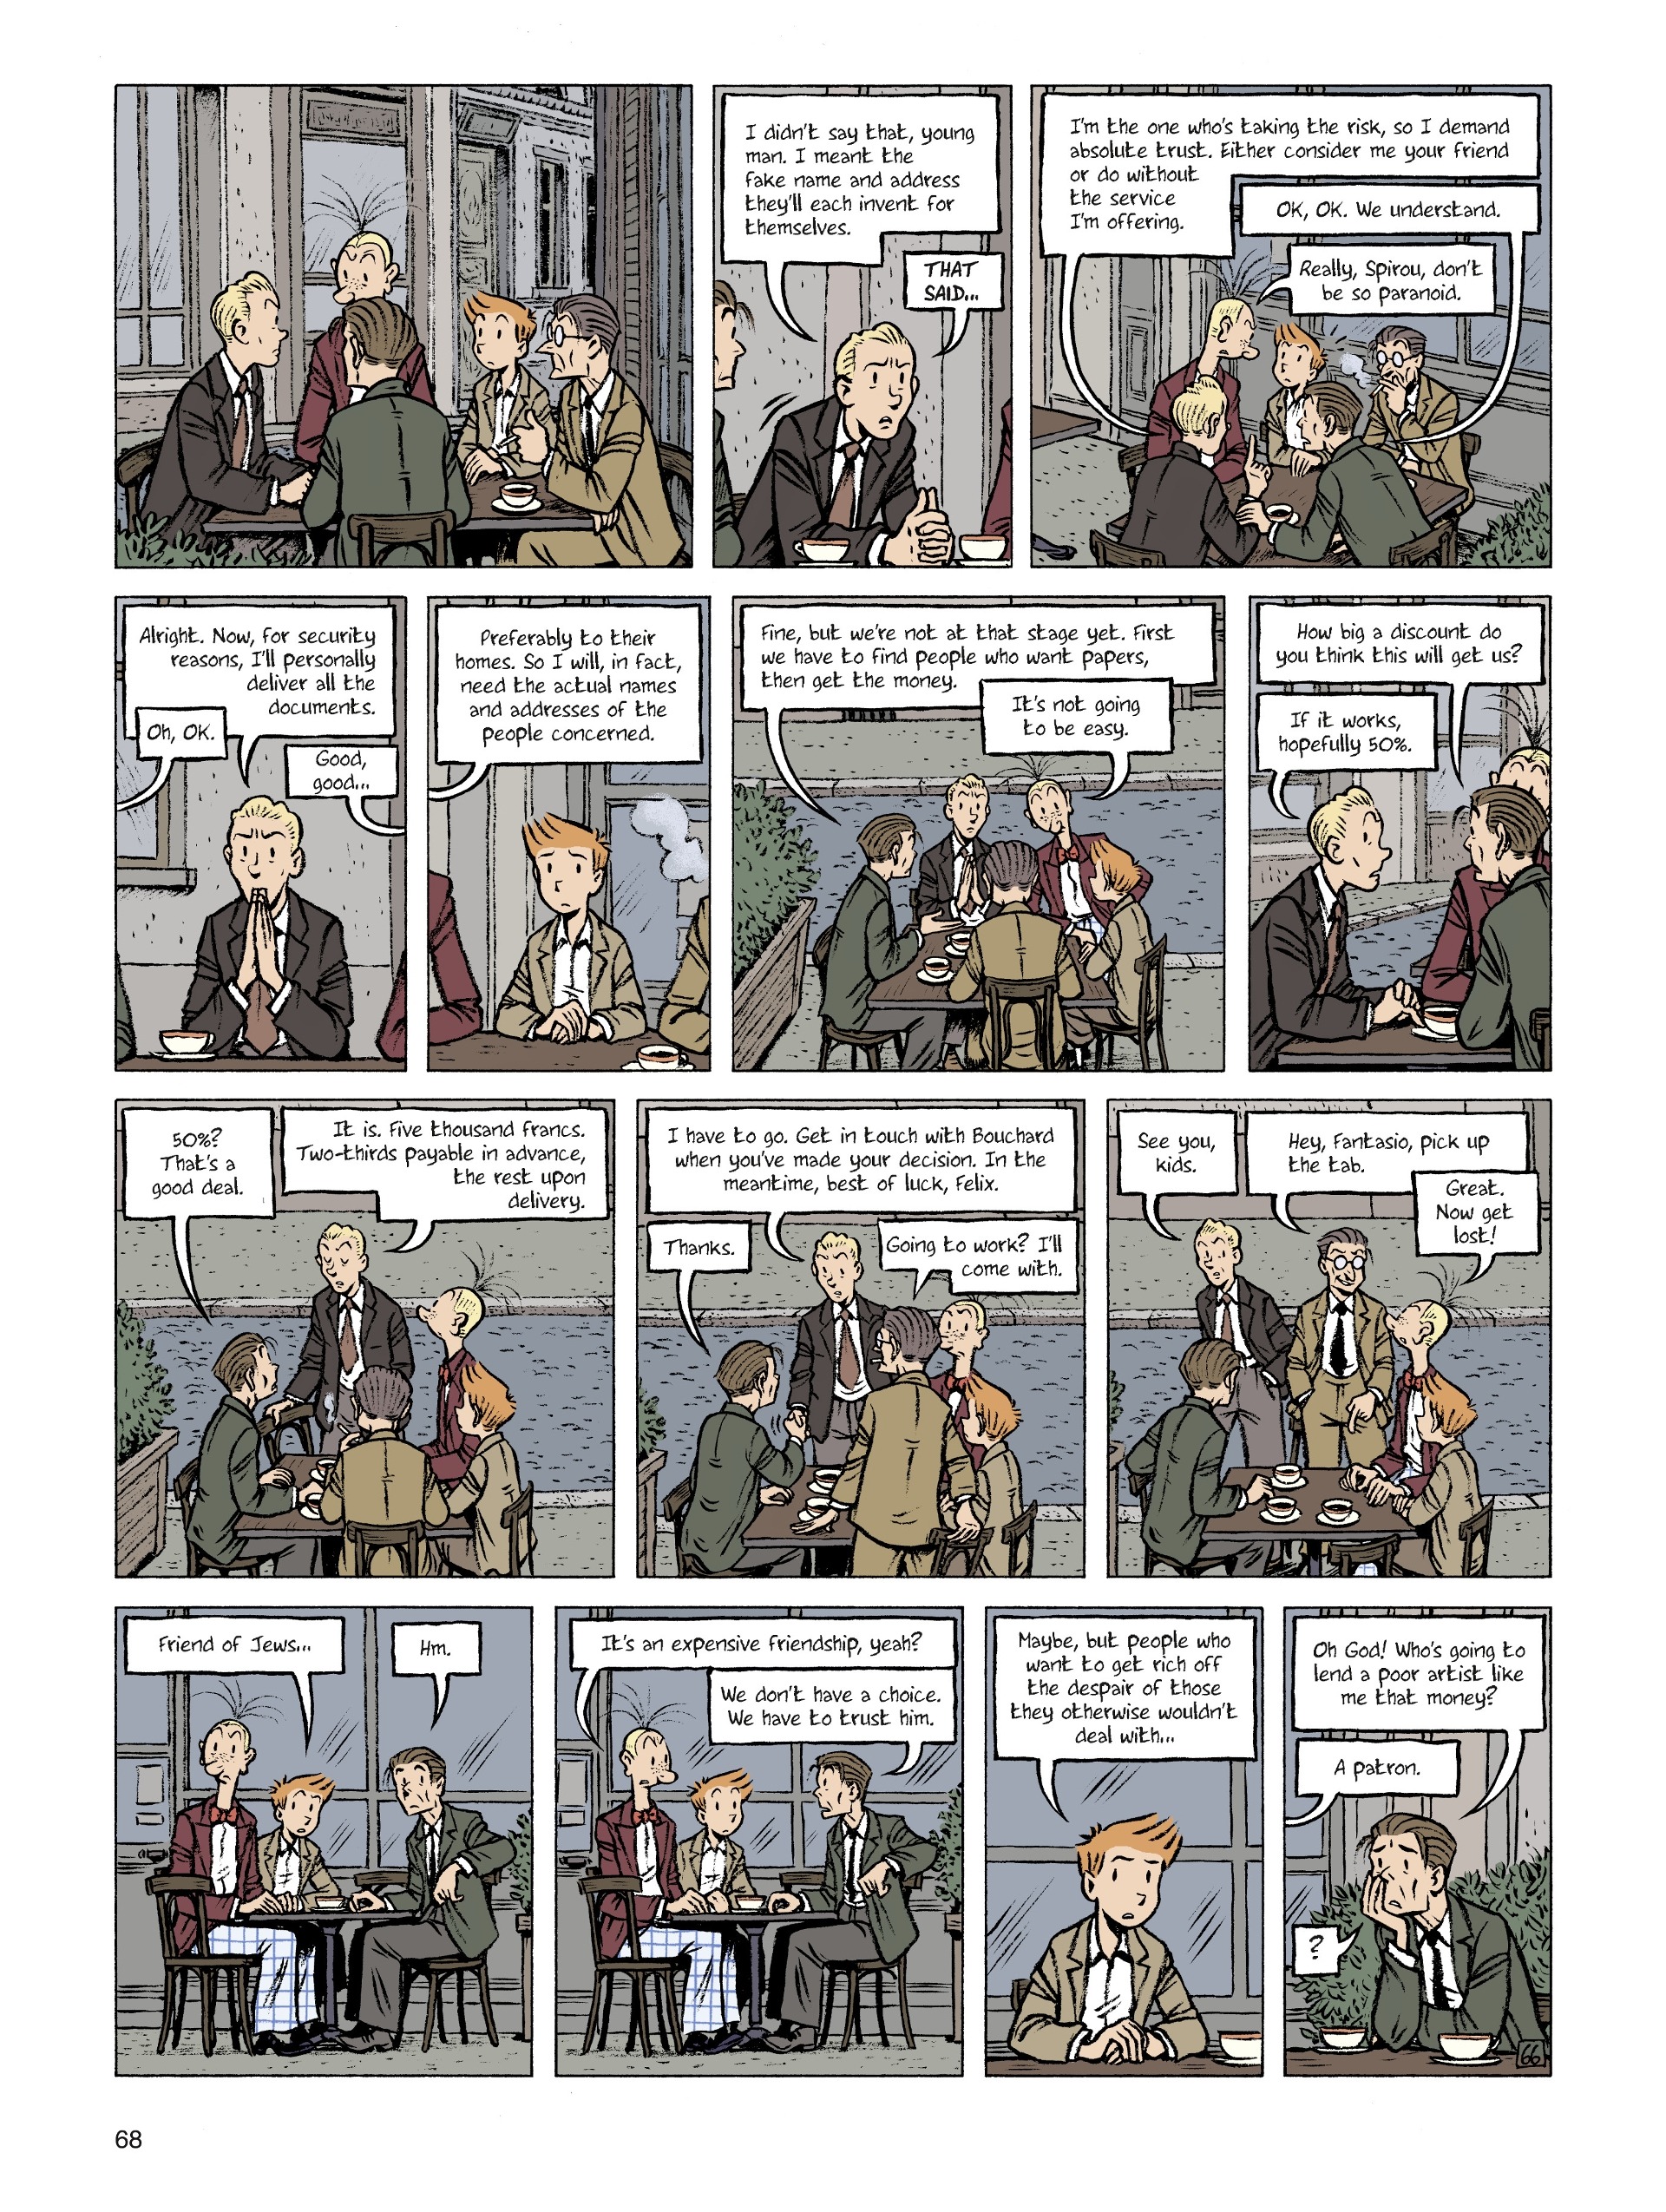 Read online Spirou: Hope Against All Odds comic -  Issue #2 - 68